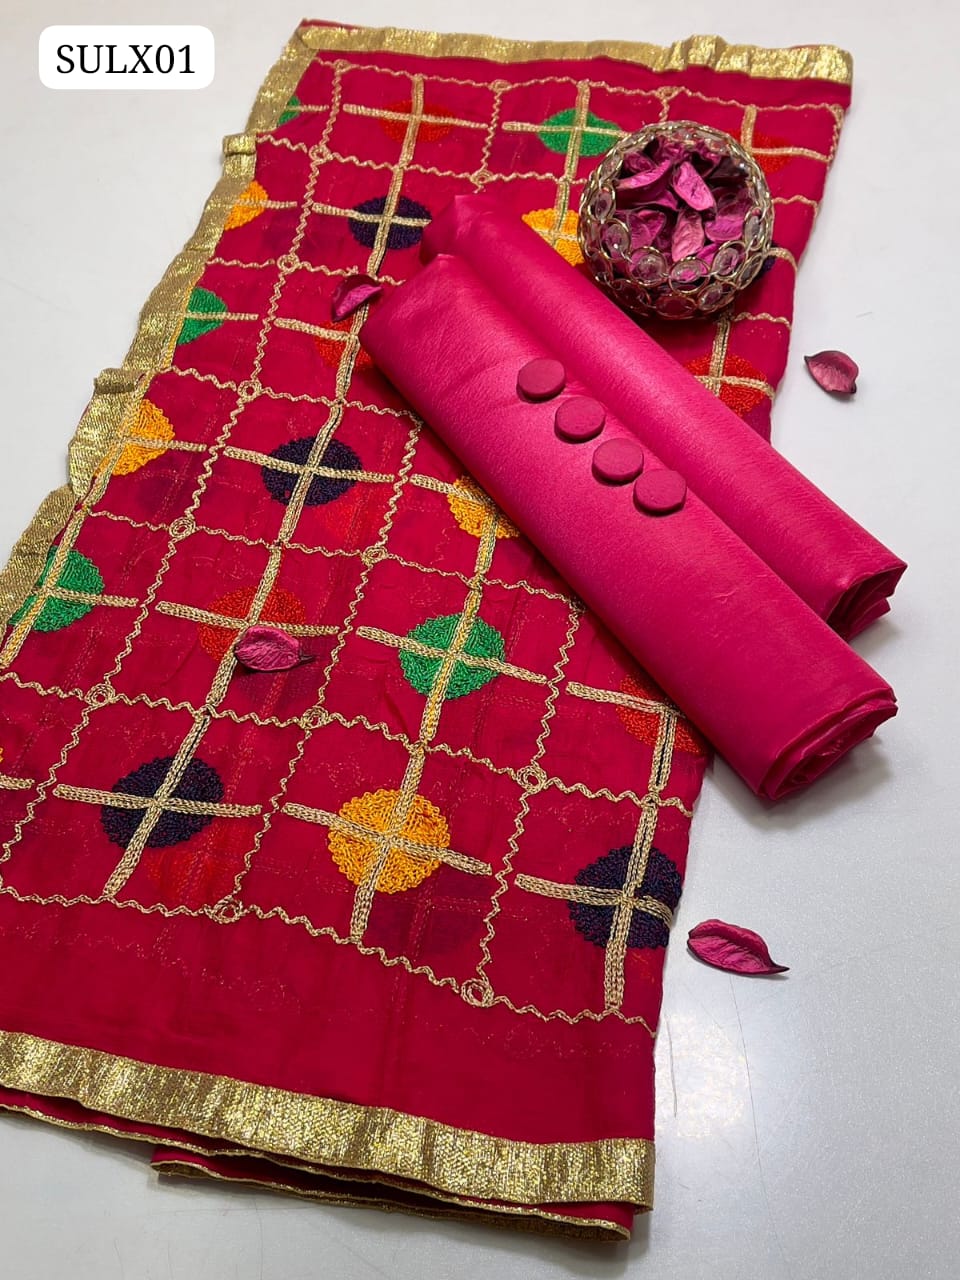 Kataan Silk Fabric Plain Shirt With Chiffon Base Multi Aari Heavy Embroidery Dupatta With 4 Side Border And Kataan Silk Plain Trouser 3Pc Dress With 4 Matching Buttons Gift